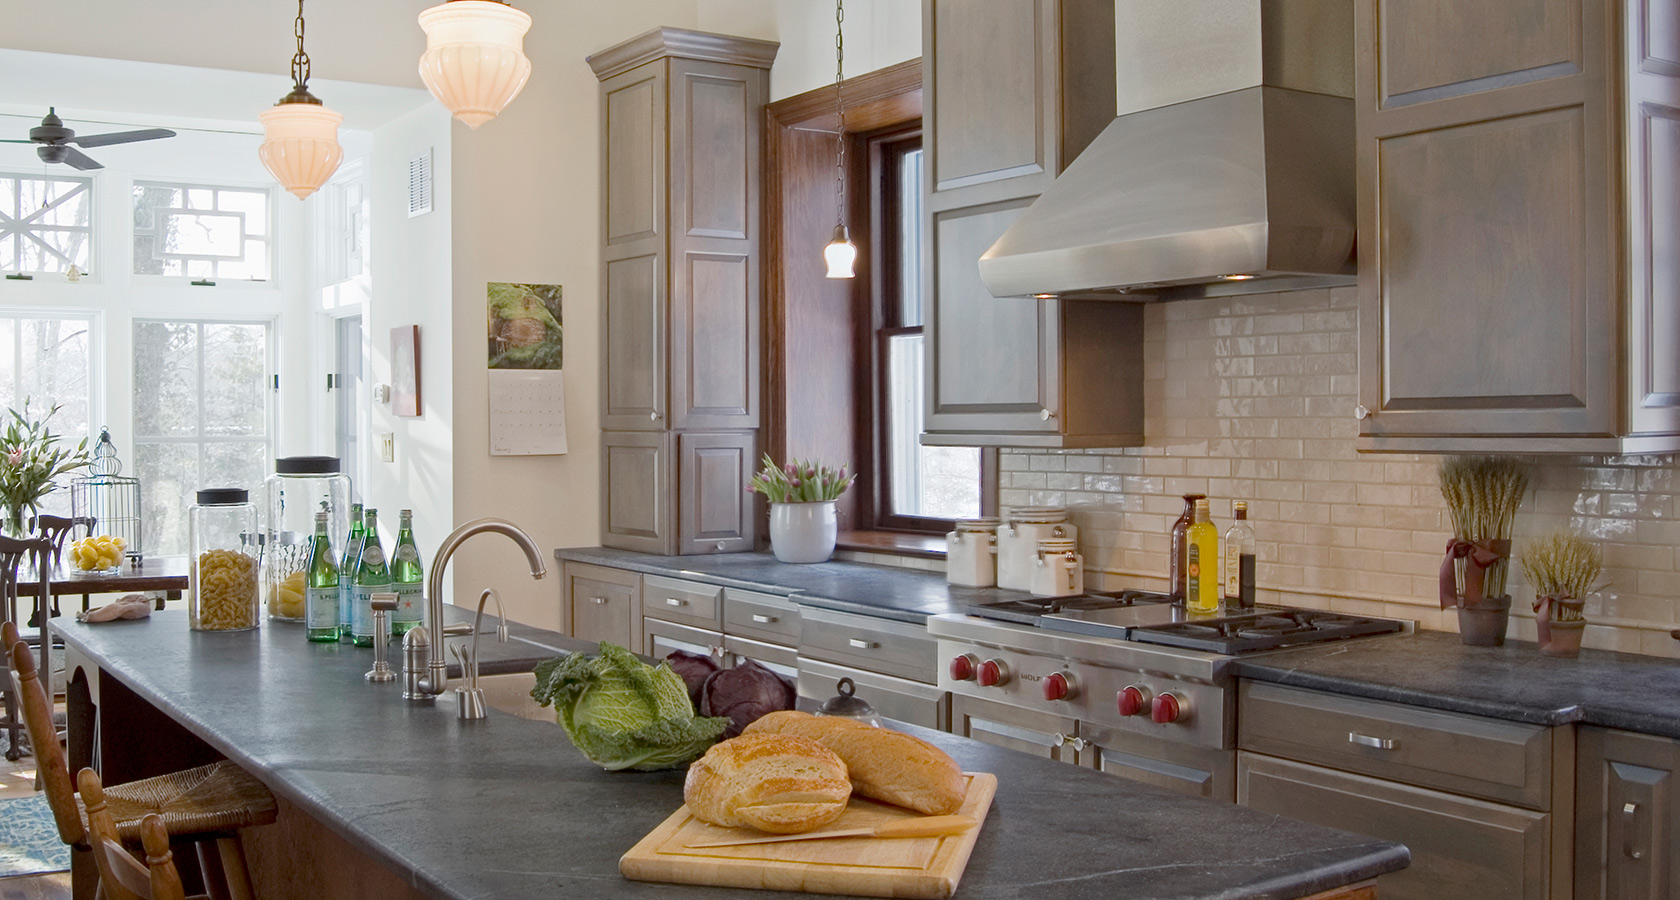 What is a soapstone countertop?